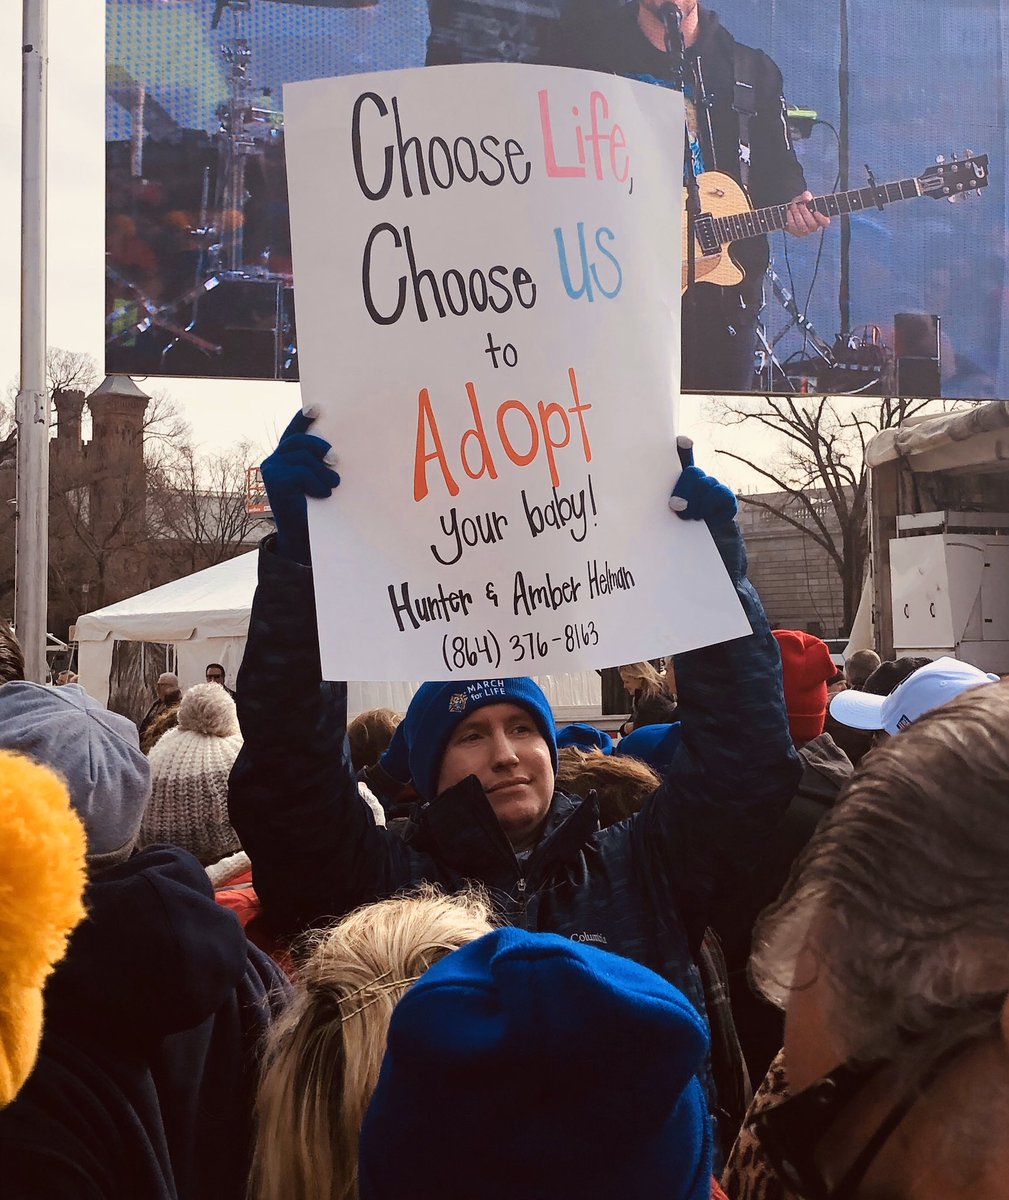 One thing that I seen at the March for Life was this couple and their sign.
Please share this!! If anyone is contemplating abortion maybe they will see this and this wonderful couple will save a life and gain a son or daughter! #whywemarch #iamprolife #prolife #abortion #adoption